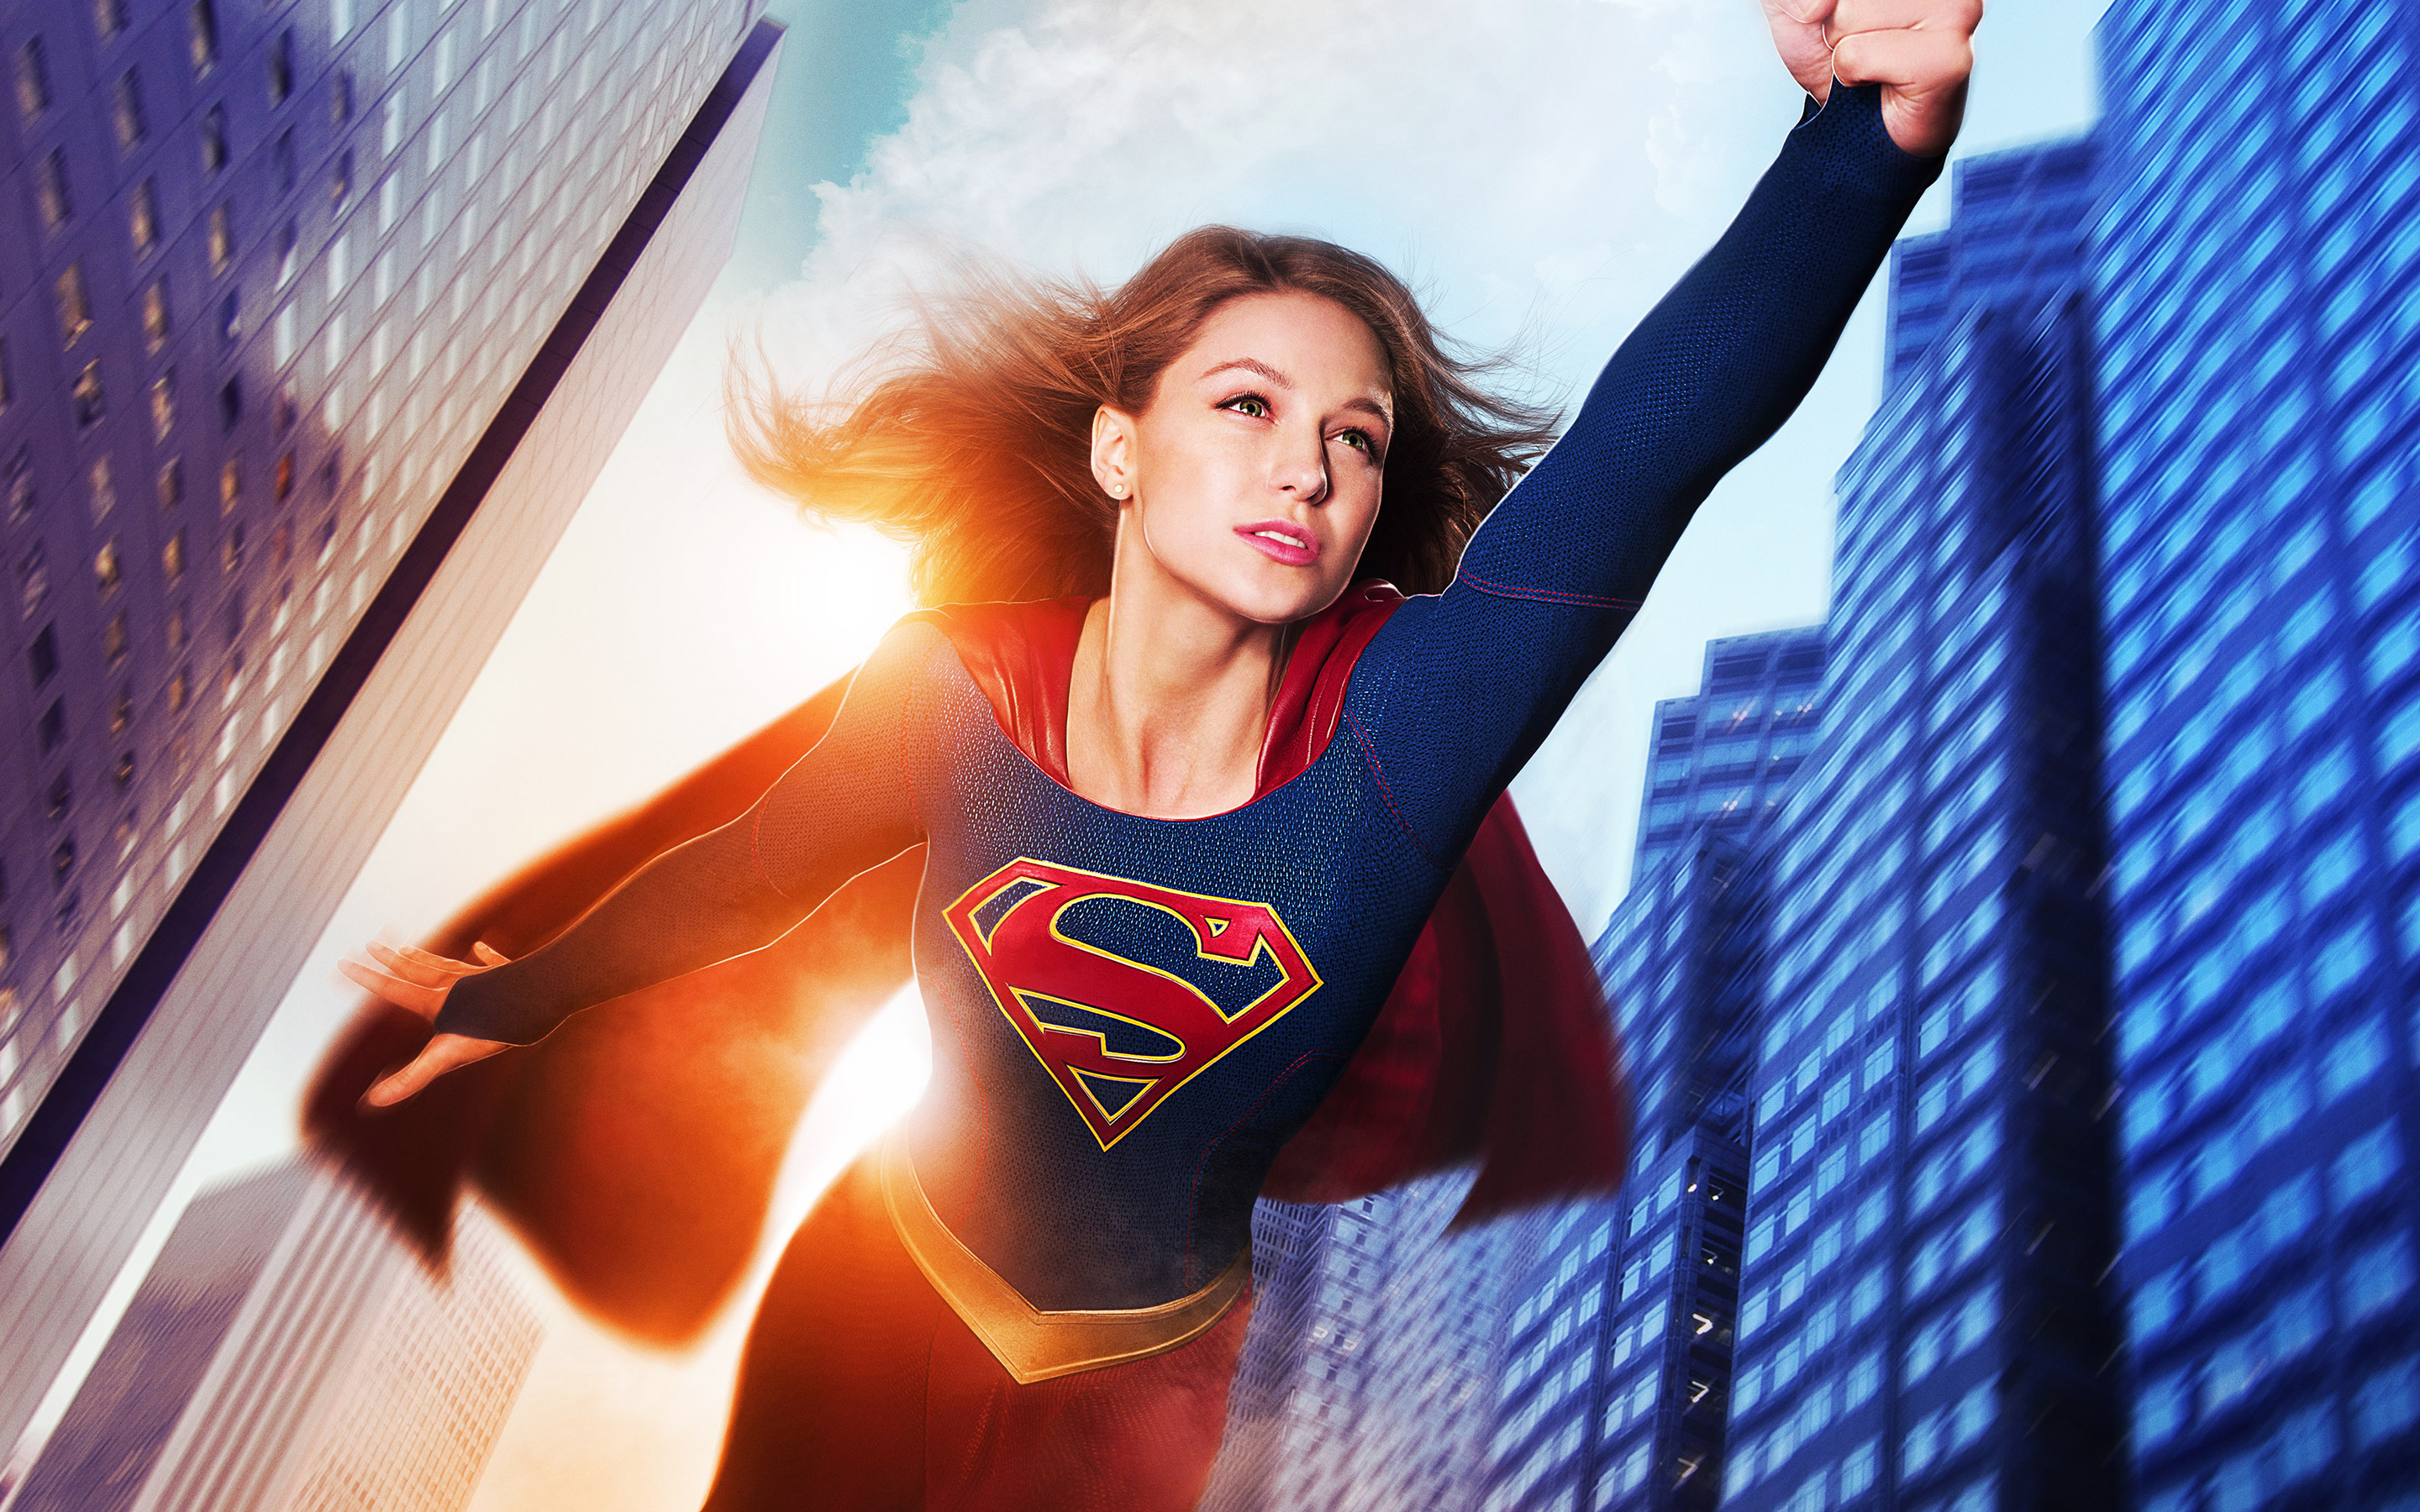 Supergirl Wallpapers